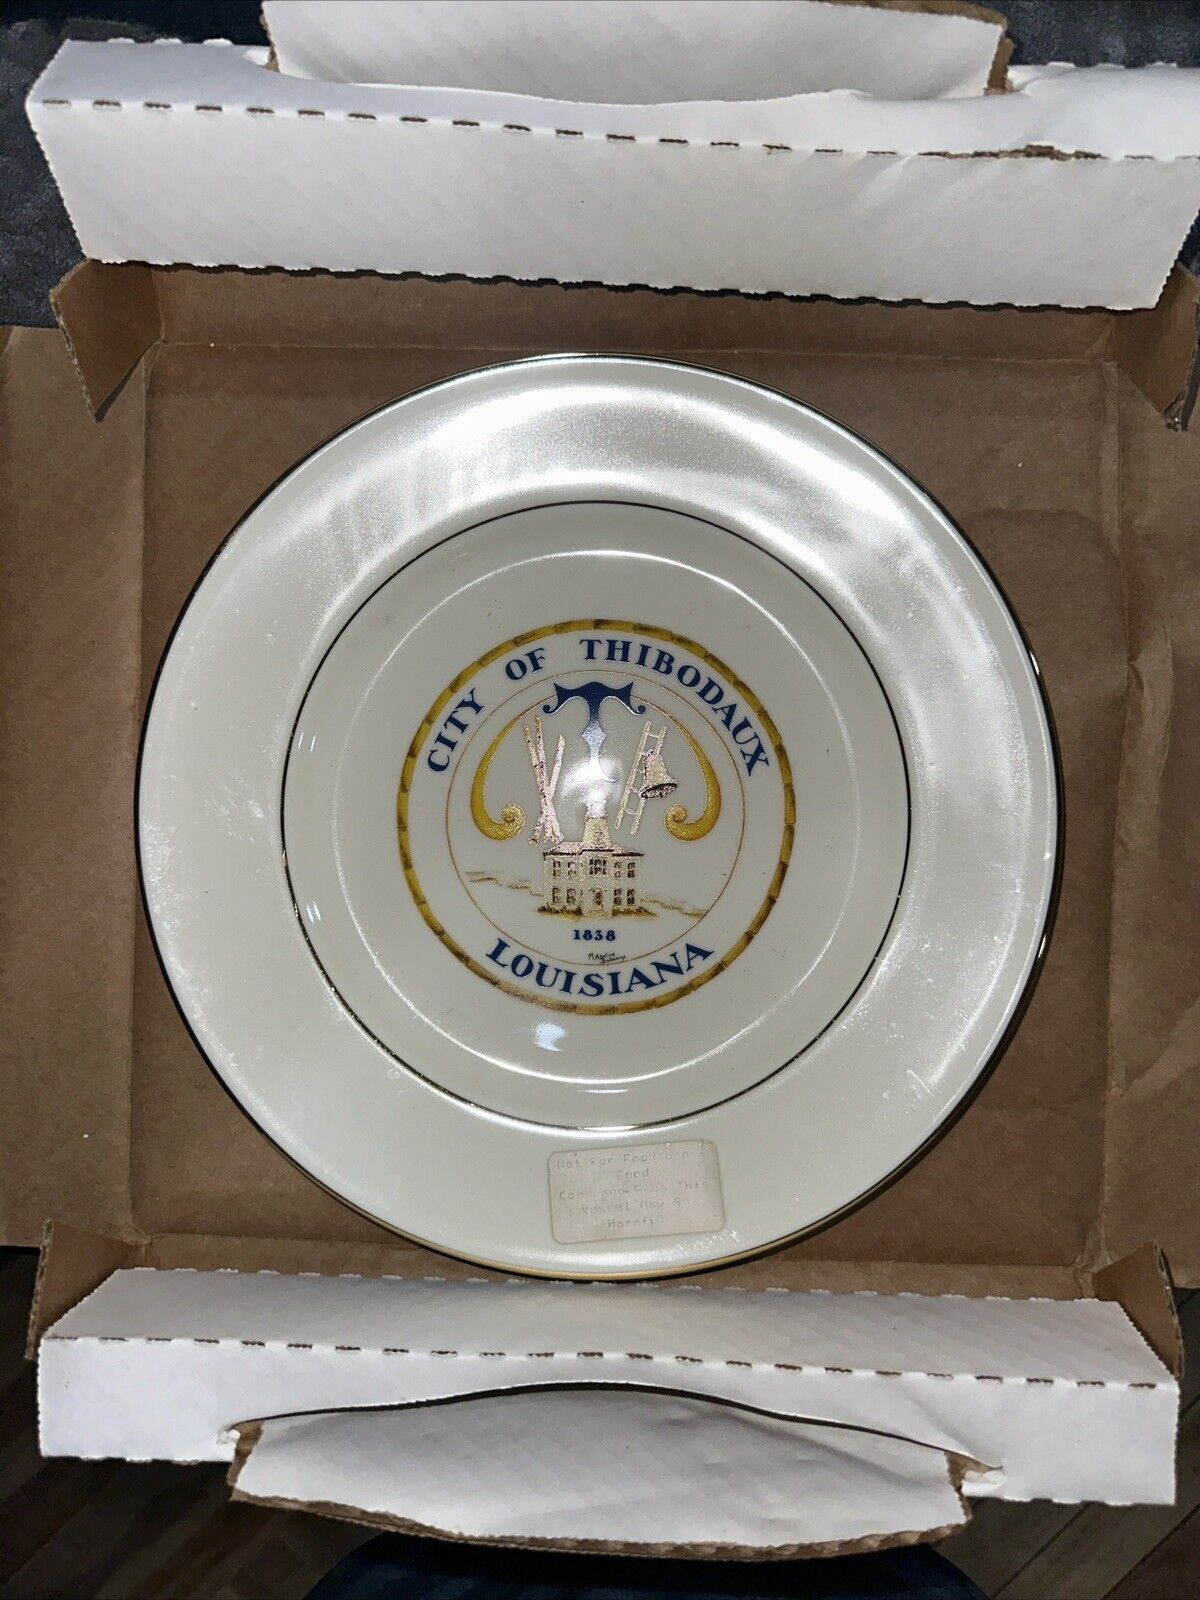 Commemorative plate and engraved brass key to the city of Thibodaux 1998-2004